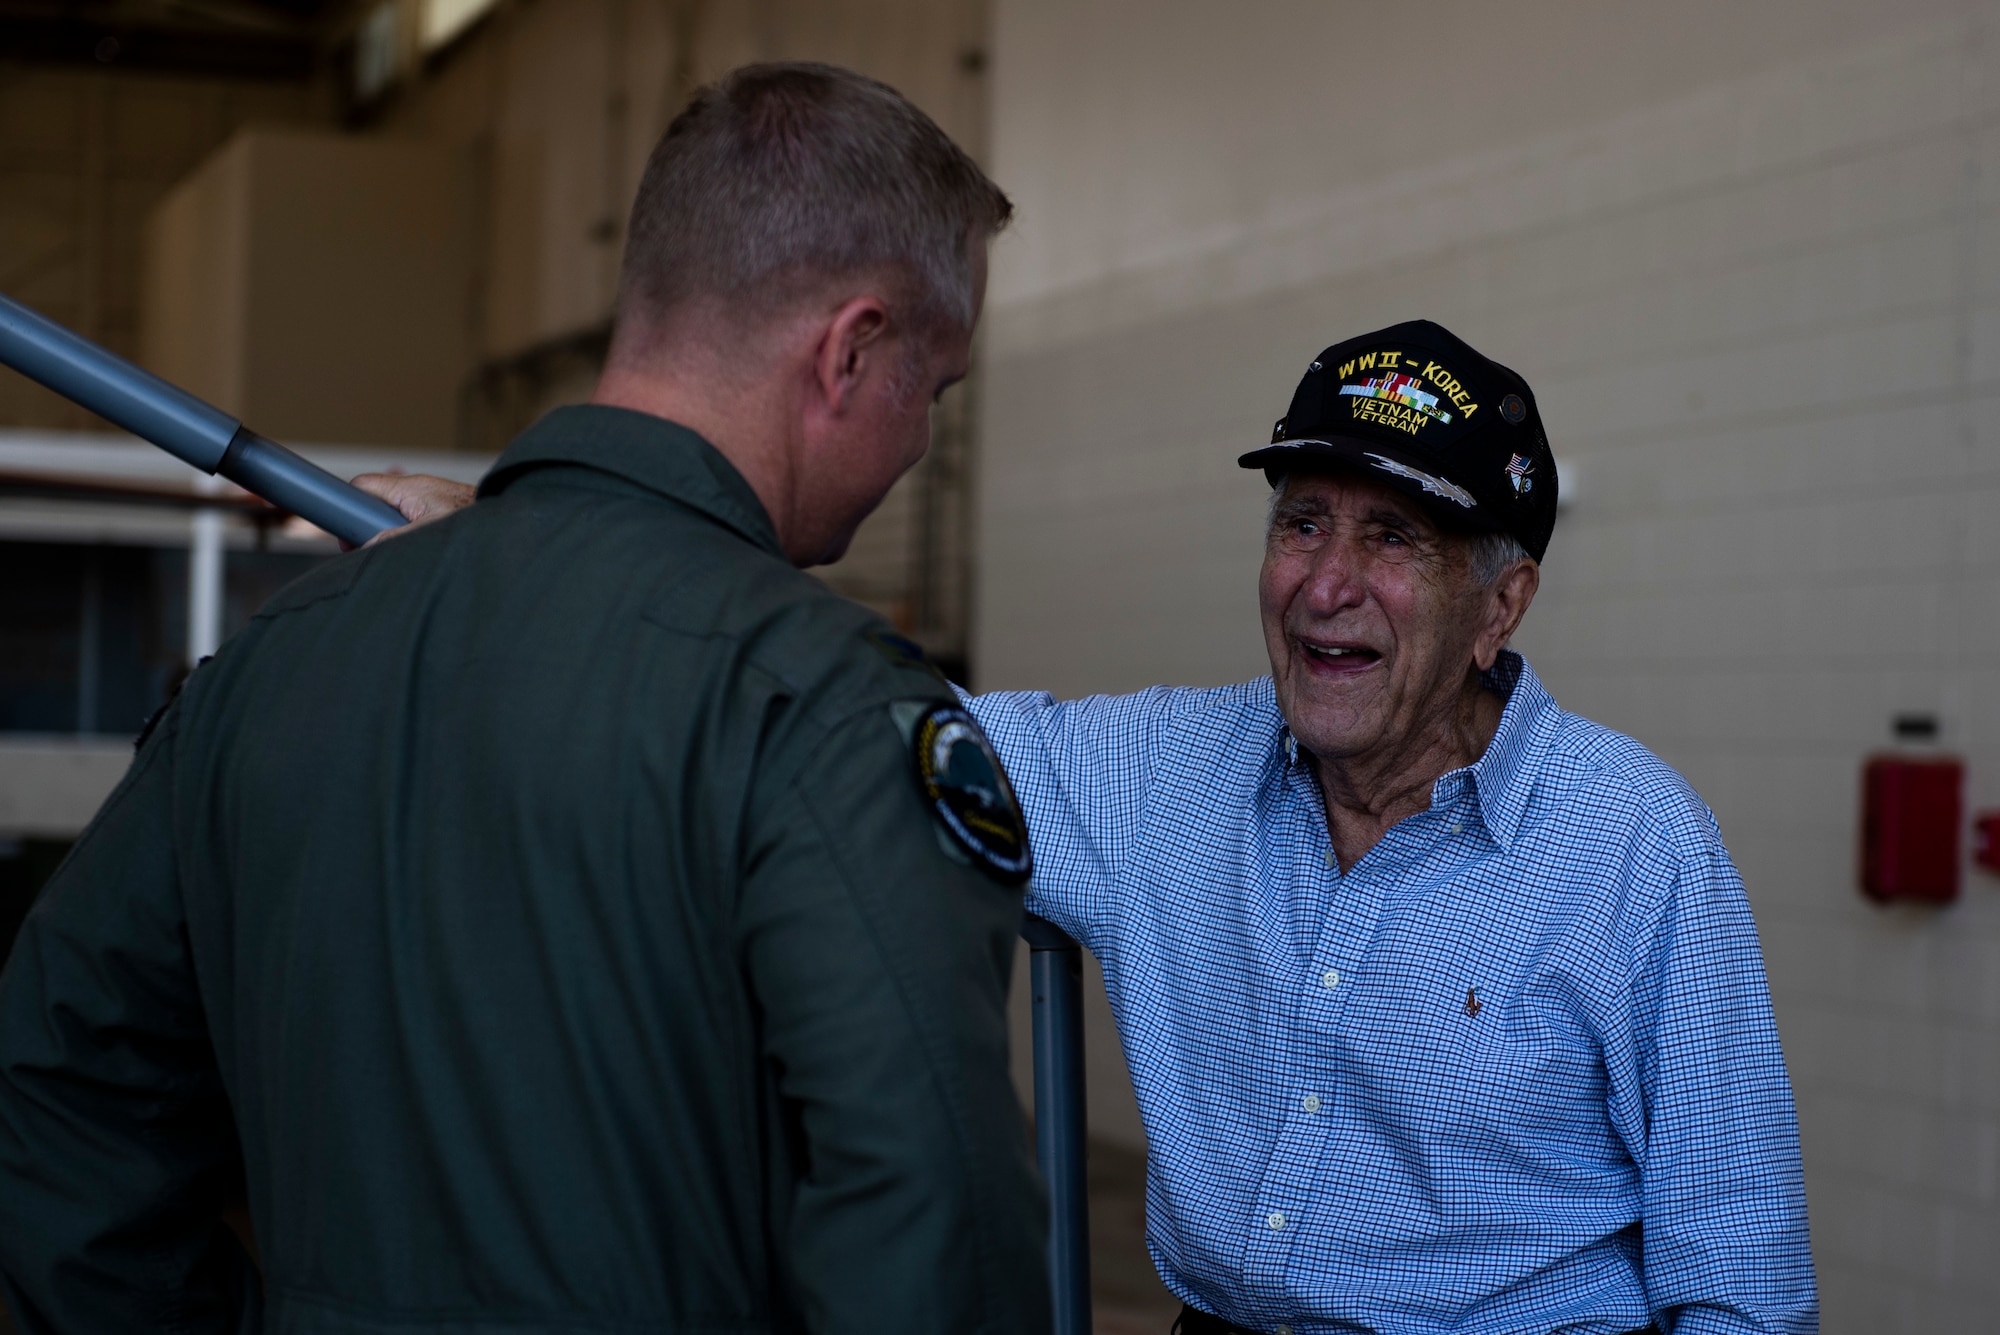 U.S. Air Force Col. Brian Laidlaw, 325th Fighter Wing commander, left, speaks to Retired U.S. Air Force Lt. Col. Daniel Daube, right, at Tyndall Air Force Base, Florida, Nov. 27, 2019. Daube was a veteran of World War II, Korean, and Vietnam war, flying multiple air frames and combat missions. Daube visited Tyndall's air traffic control tower, saw planes launch off the runway, and visited a QF-16 Fighting Falcon hangar and sat in the cockpit of an aircraft. (U.S. Air Force photo by Staff Sgt. Magen M. Reeves)